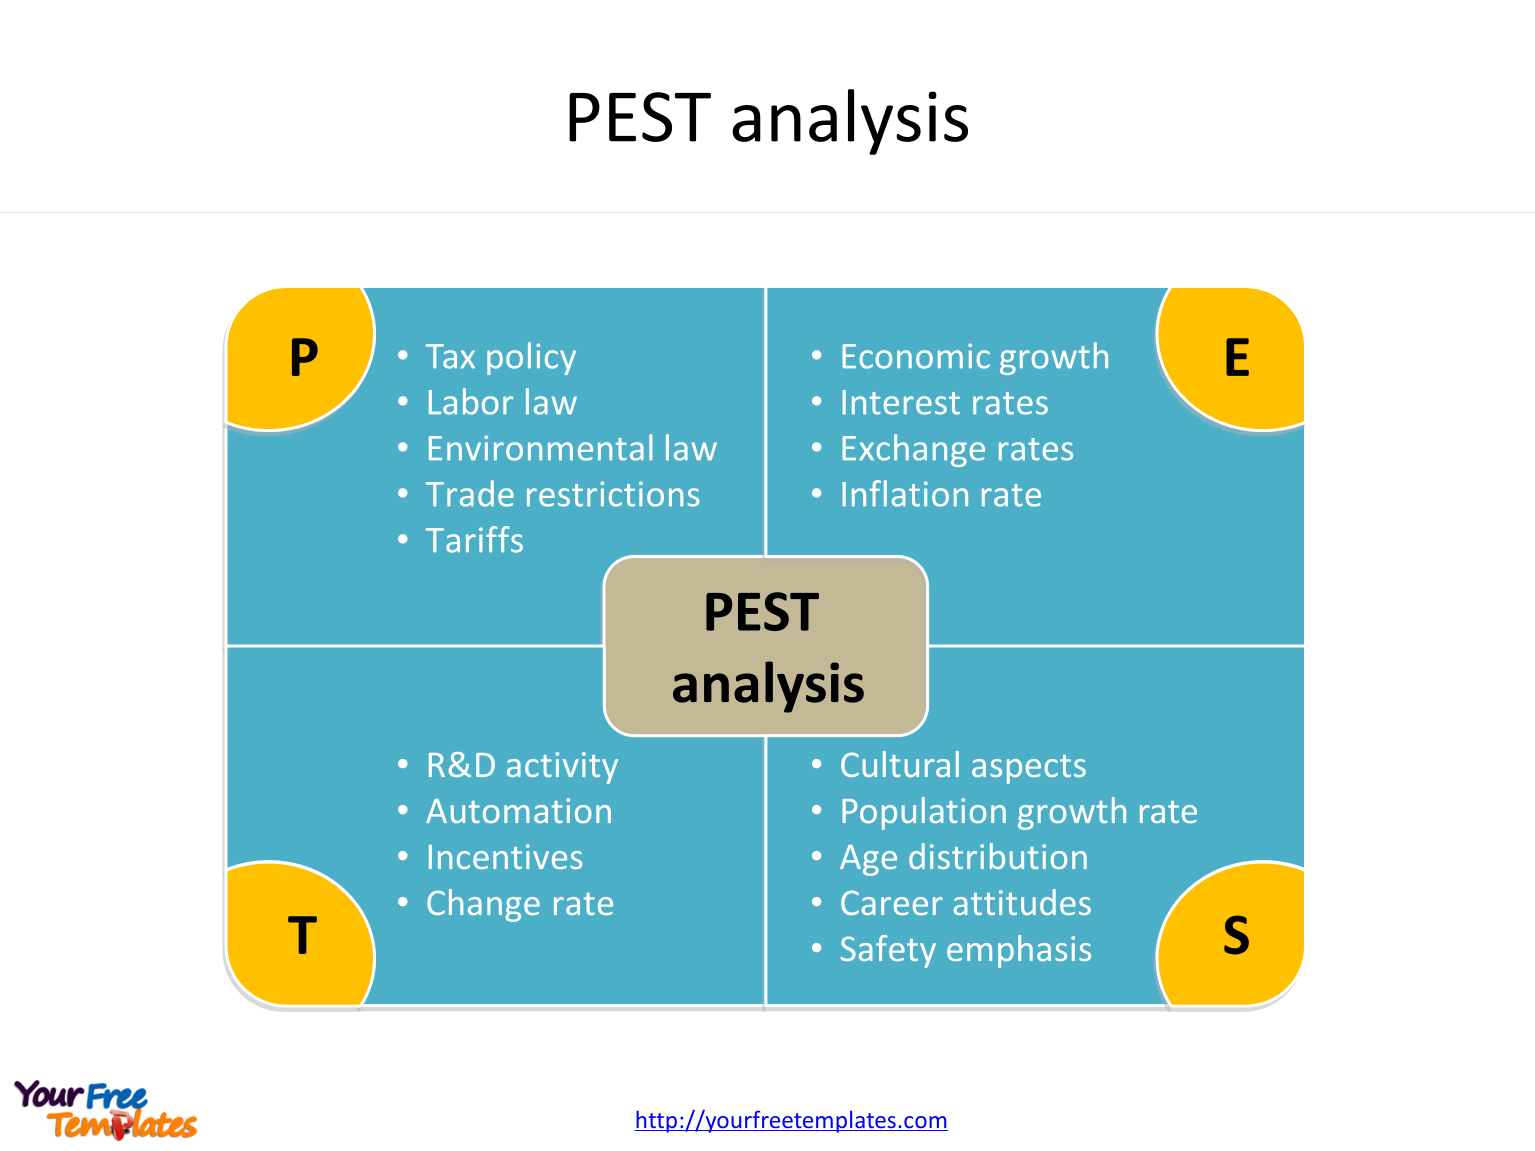 PEST analysis template of Political, Economic, Social and Technological factors.